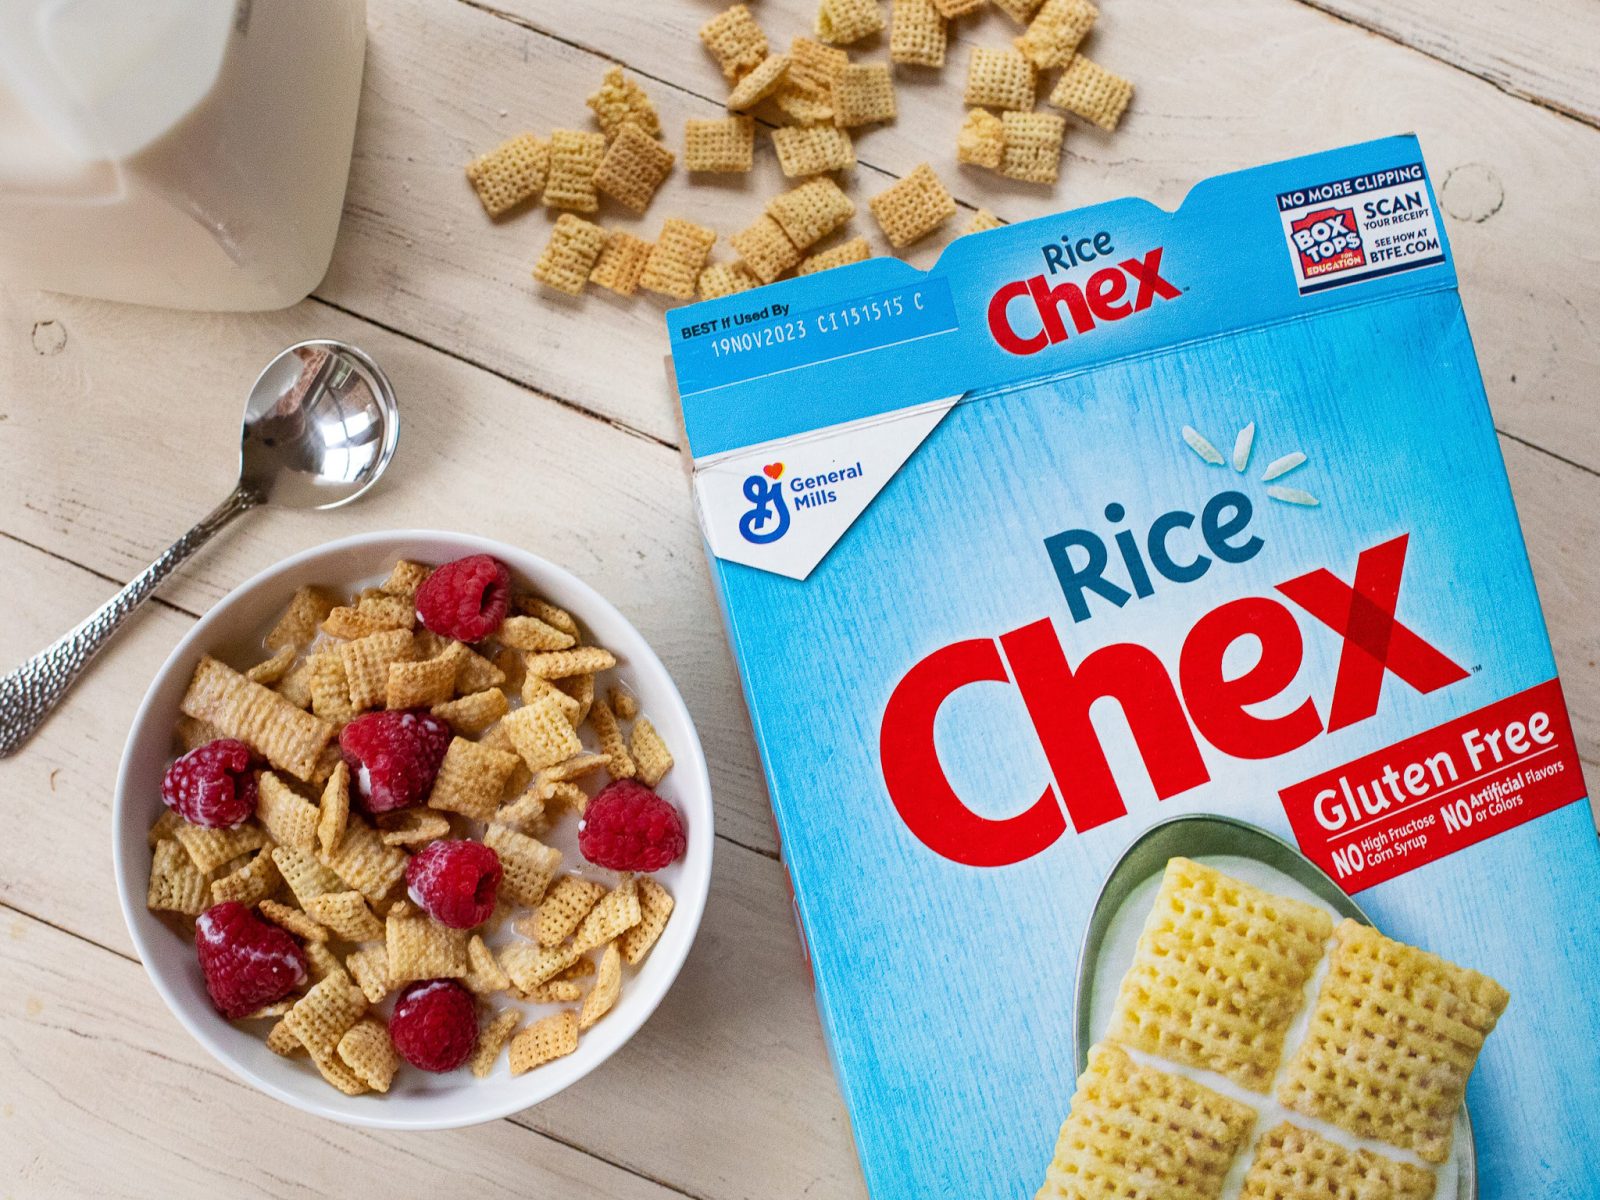 Chex Cereal As Low As $1.57 Per Box At Publix